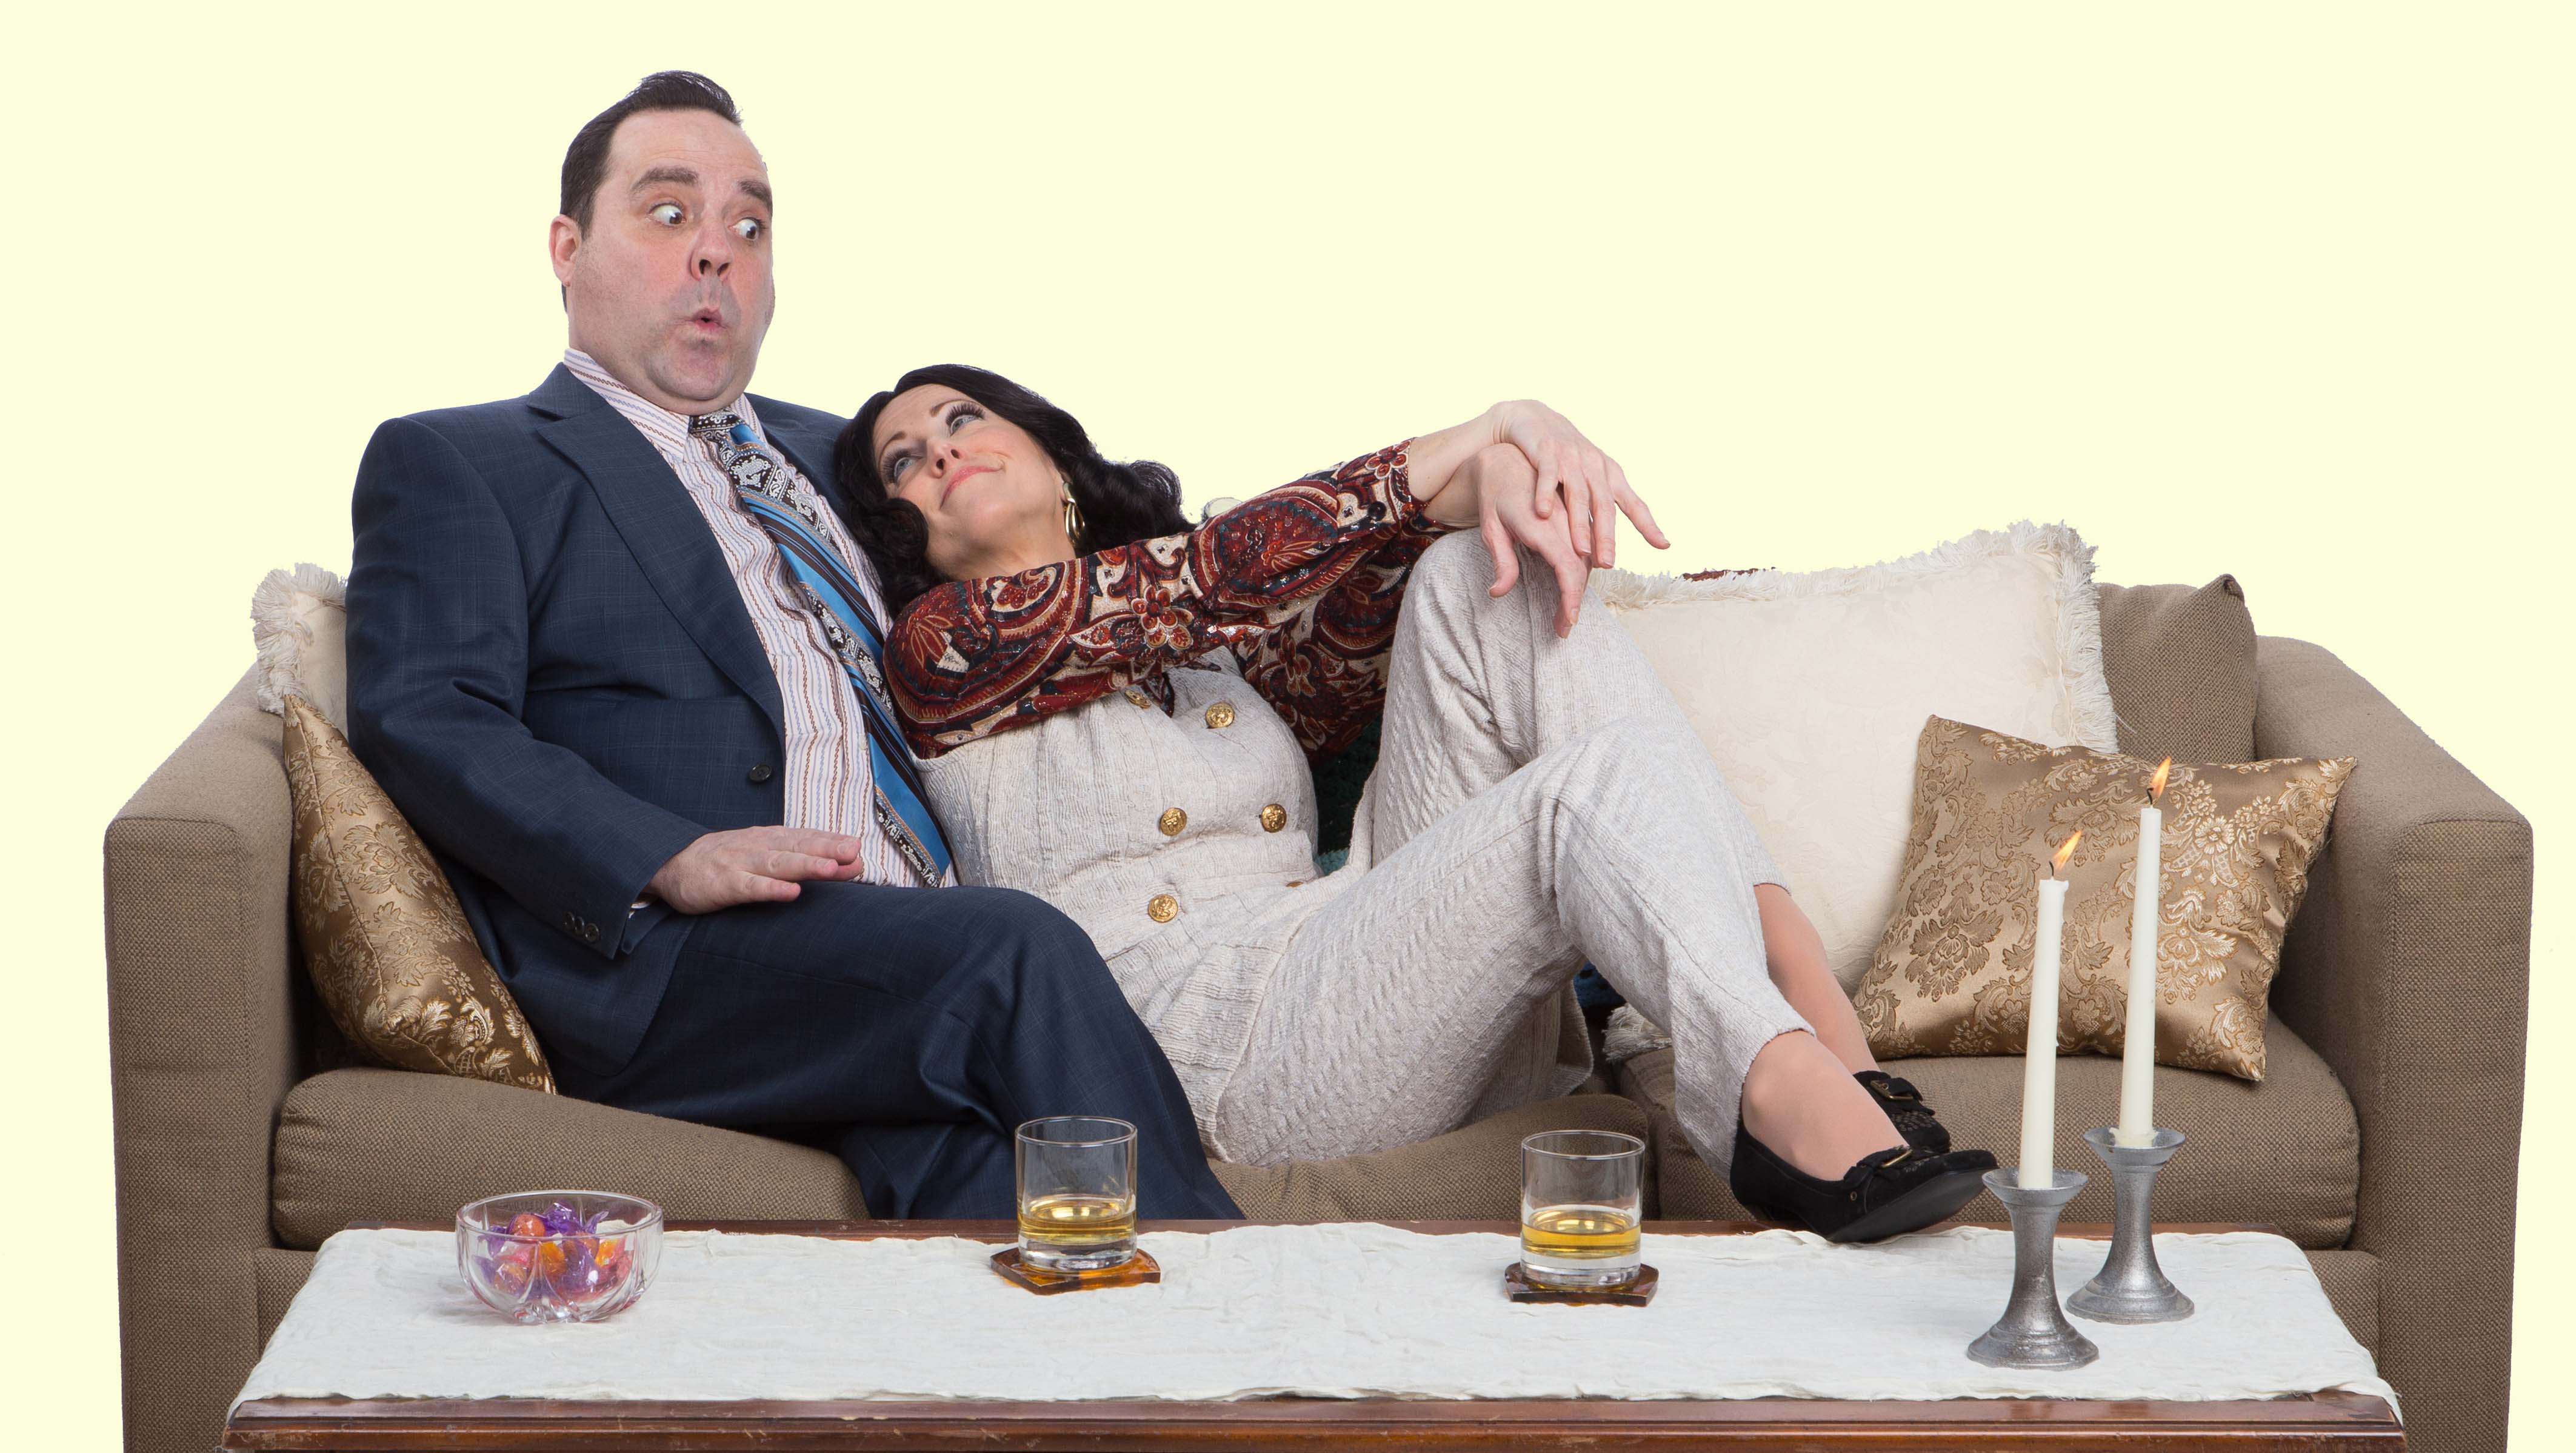 Walnut Street Theatre, America’s oldest theatre company, presents a fresh interpretation of Last of the Red Hot Lovers that captures the hilarious dilemma of a modern man in the hip sixties looking for something amorously new and different, but finding himself in the same situation, again and again…and again!